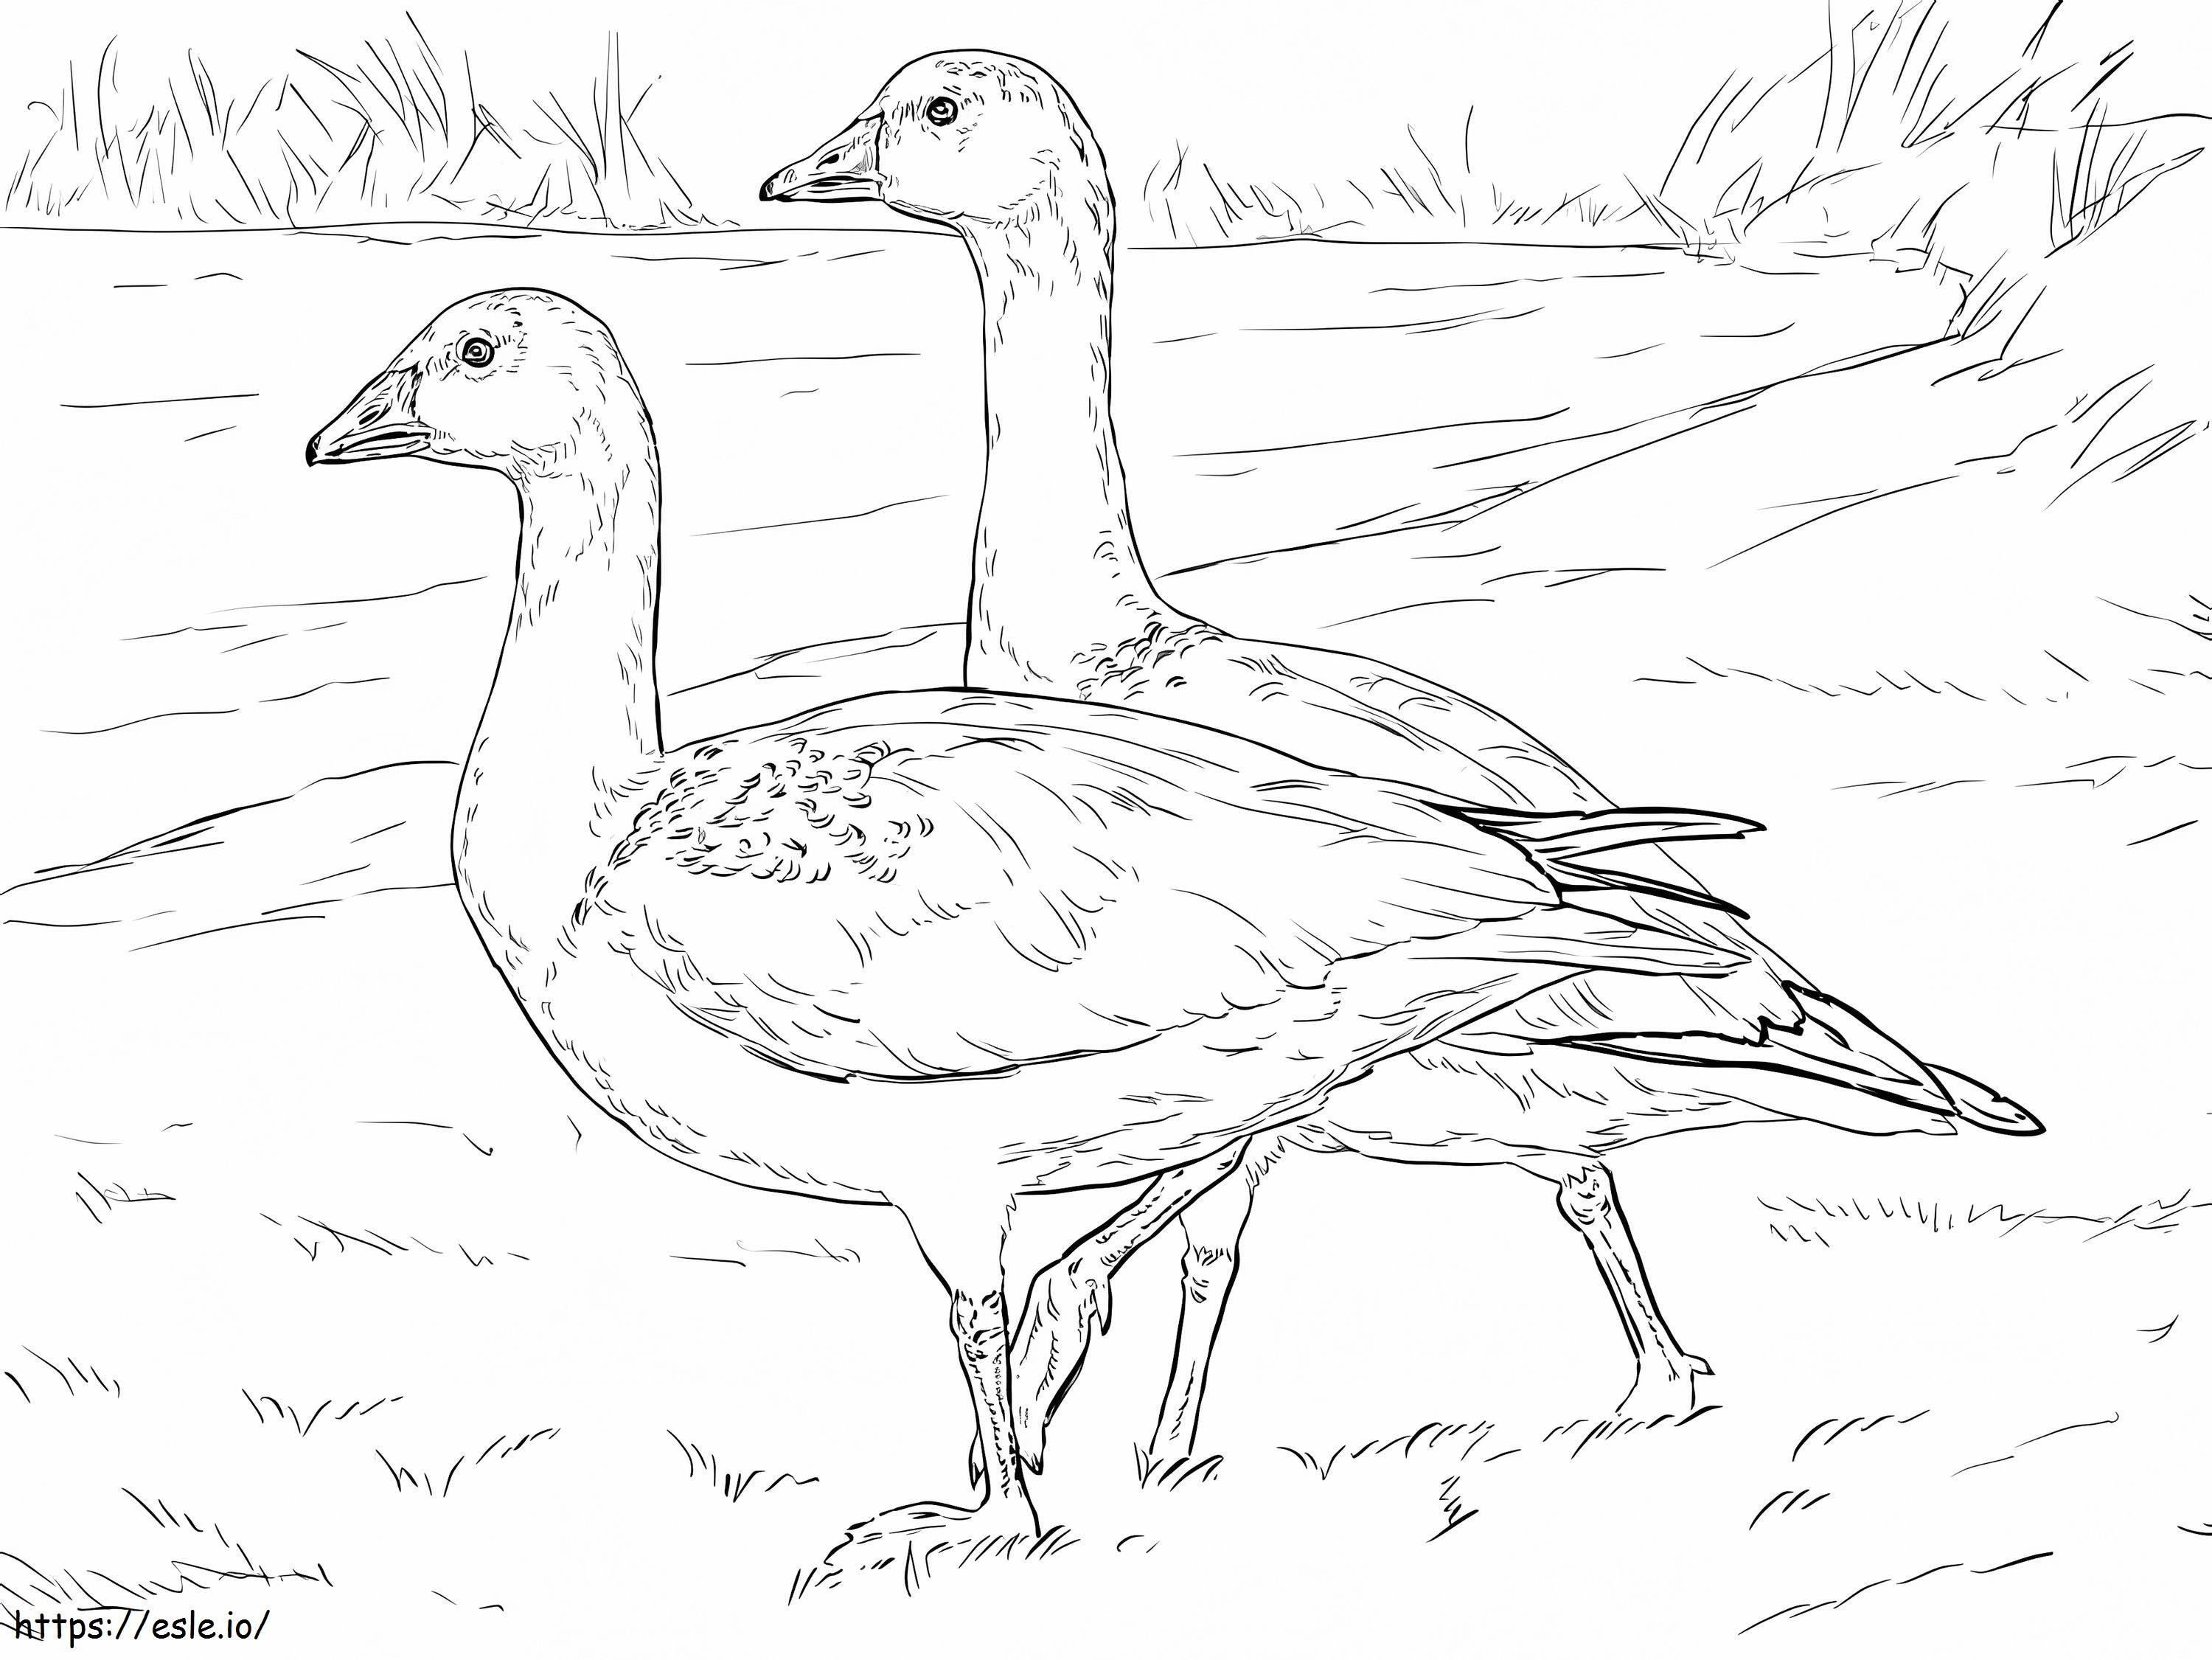 Rosss Geese coloring page